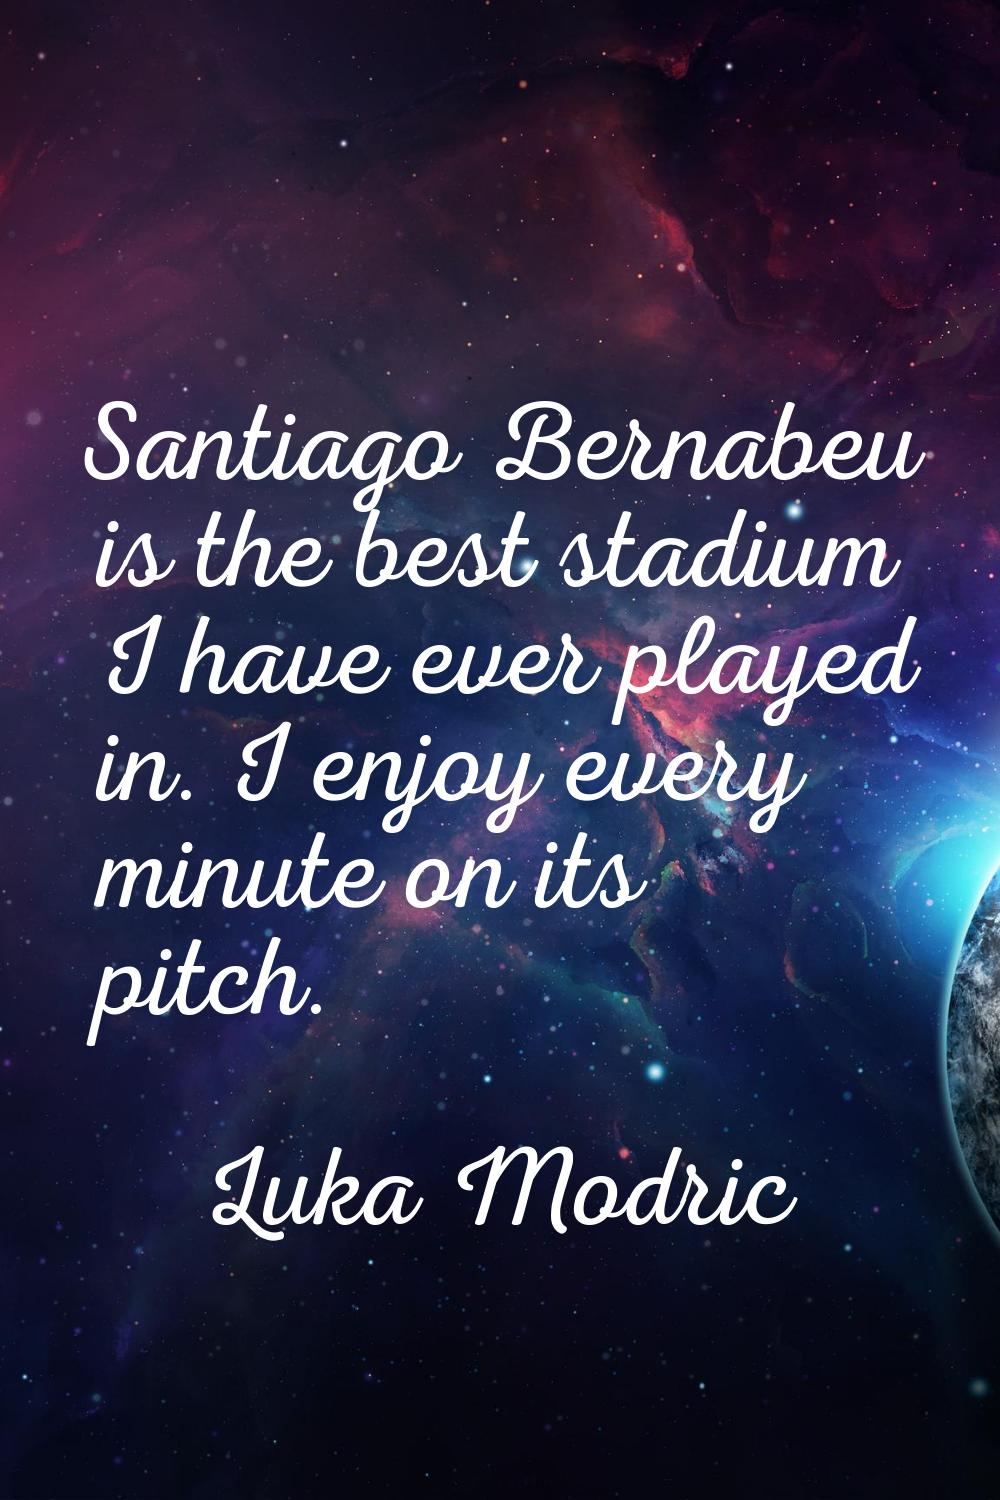 Santiago Bernabeu is the best stadium I have ever played in. I enjoy every minute on its pitch.